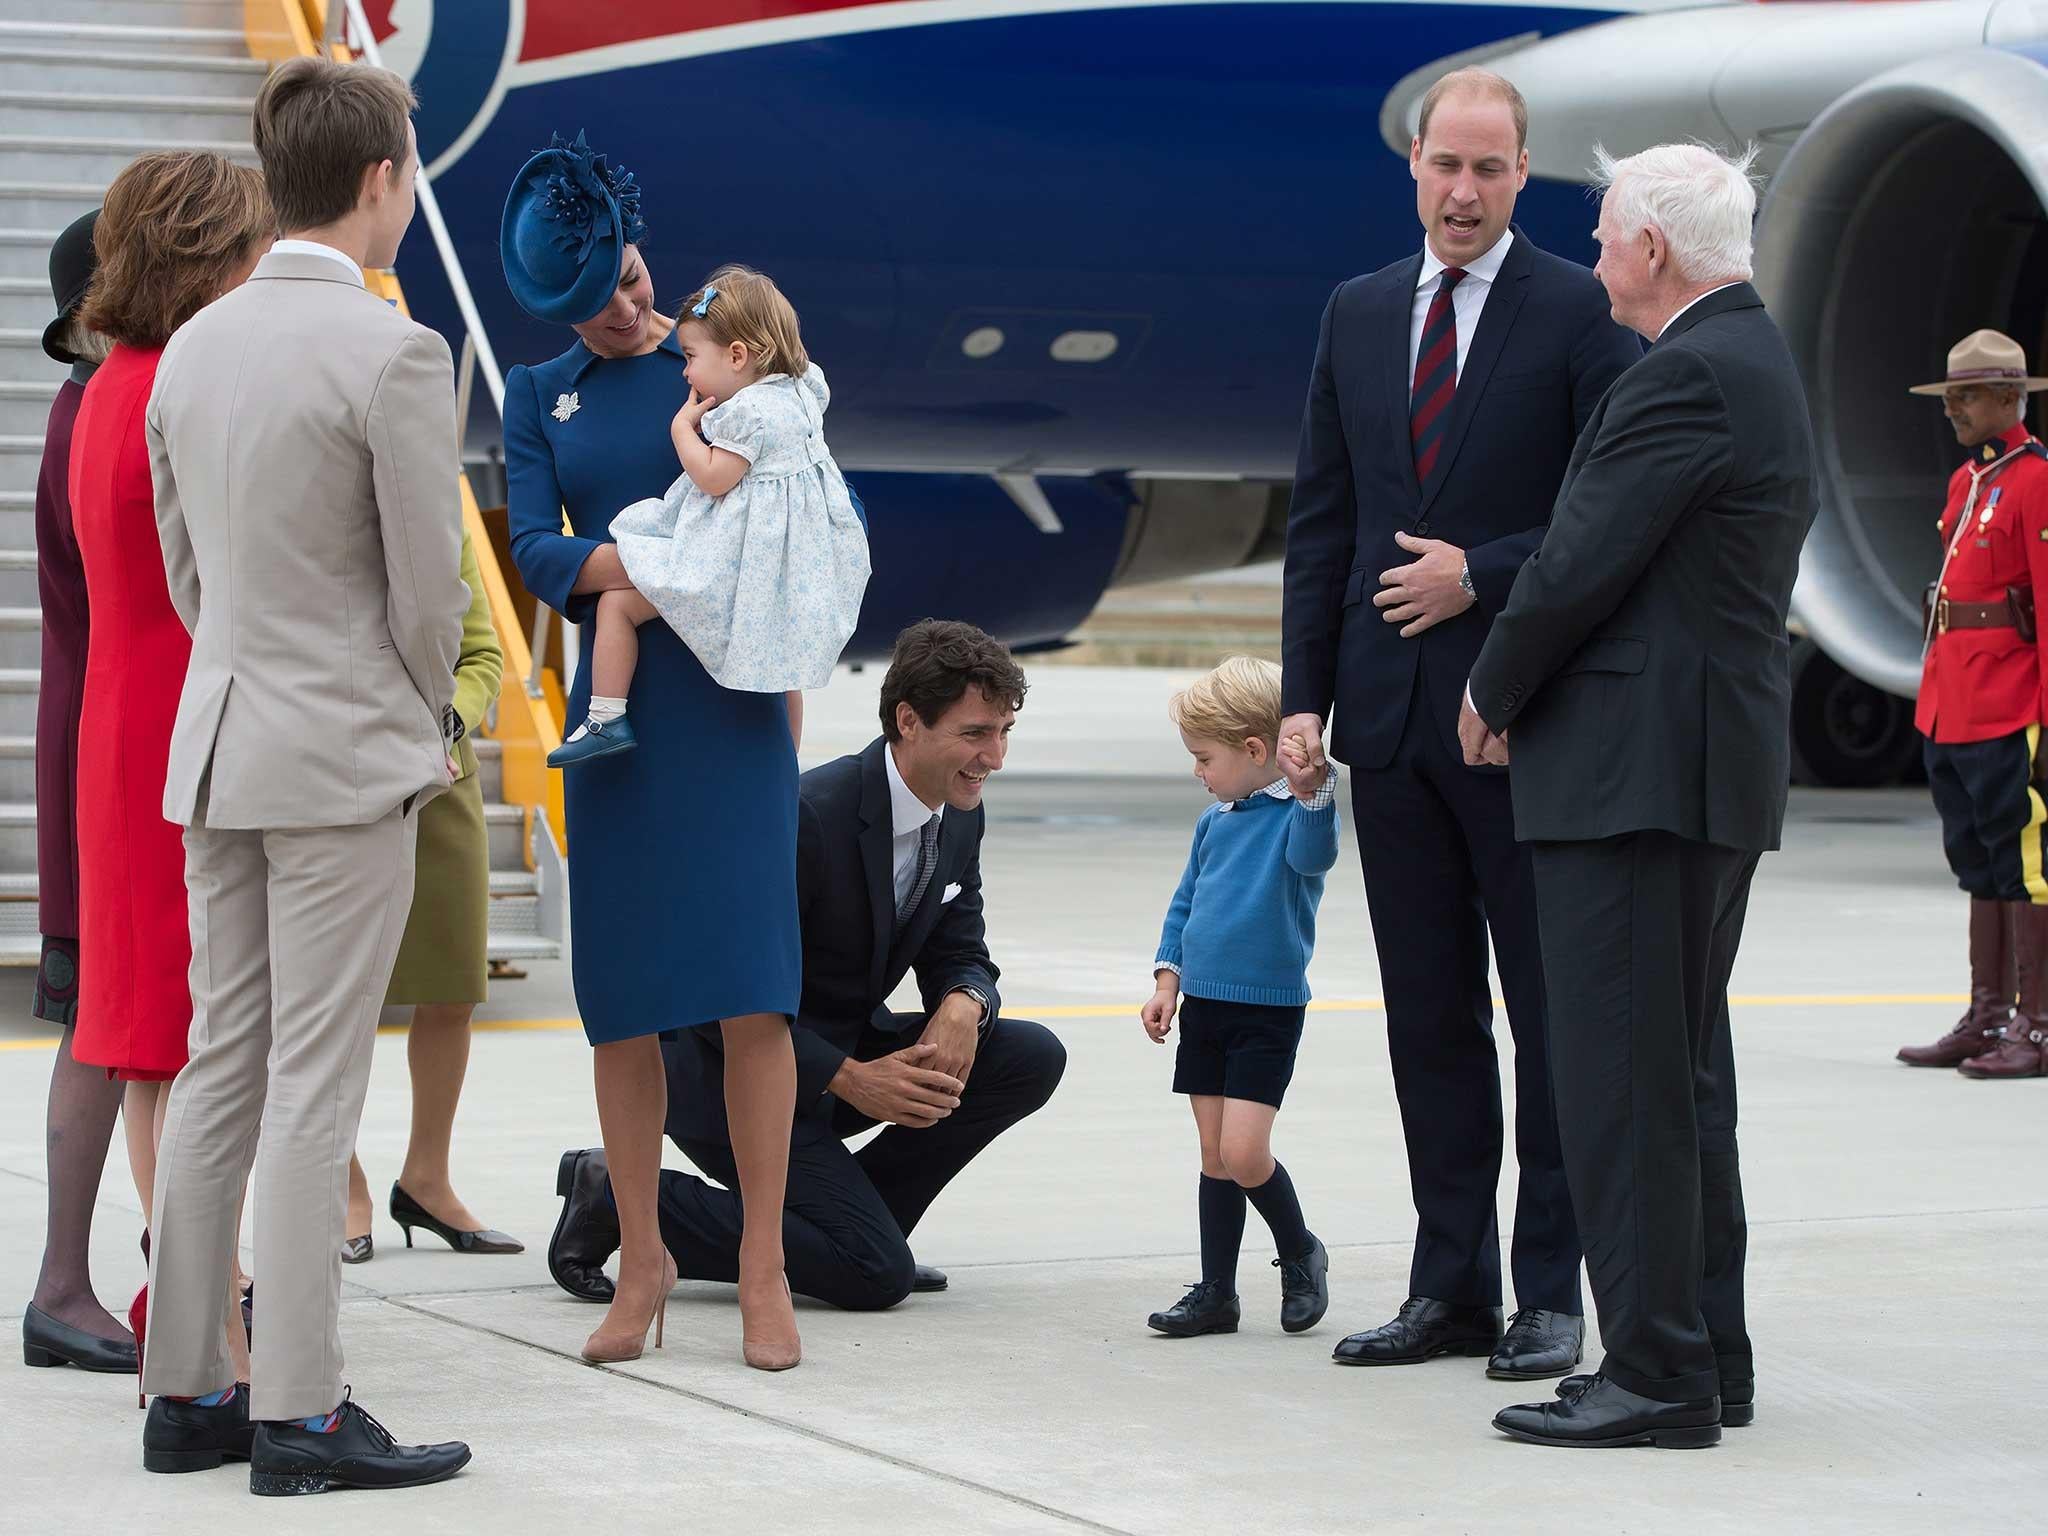 Will and Kate's last visit cost the Canadian tax payer $1.2 million